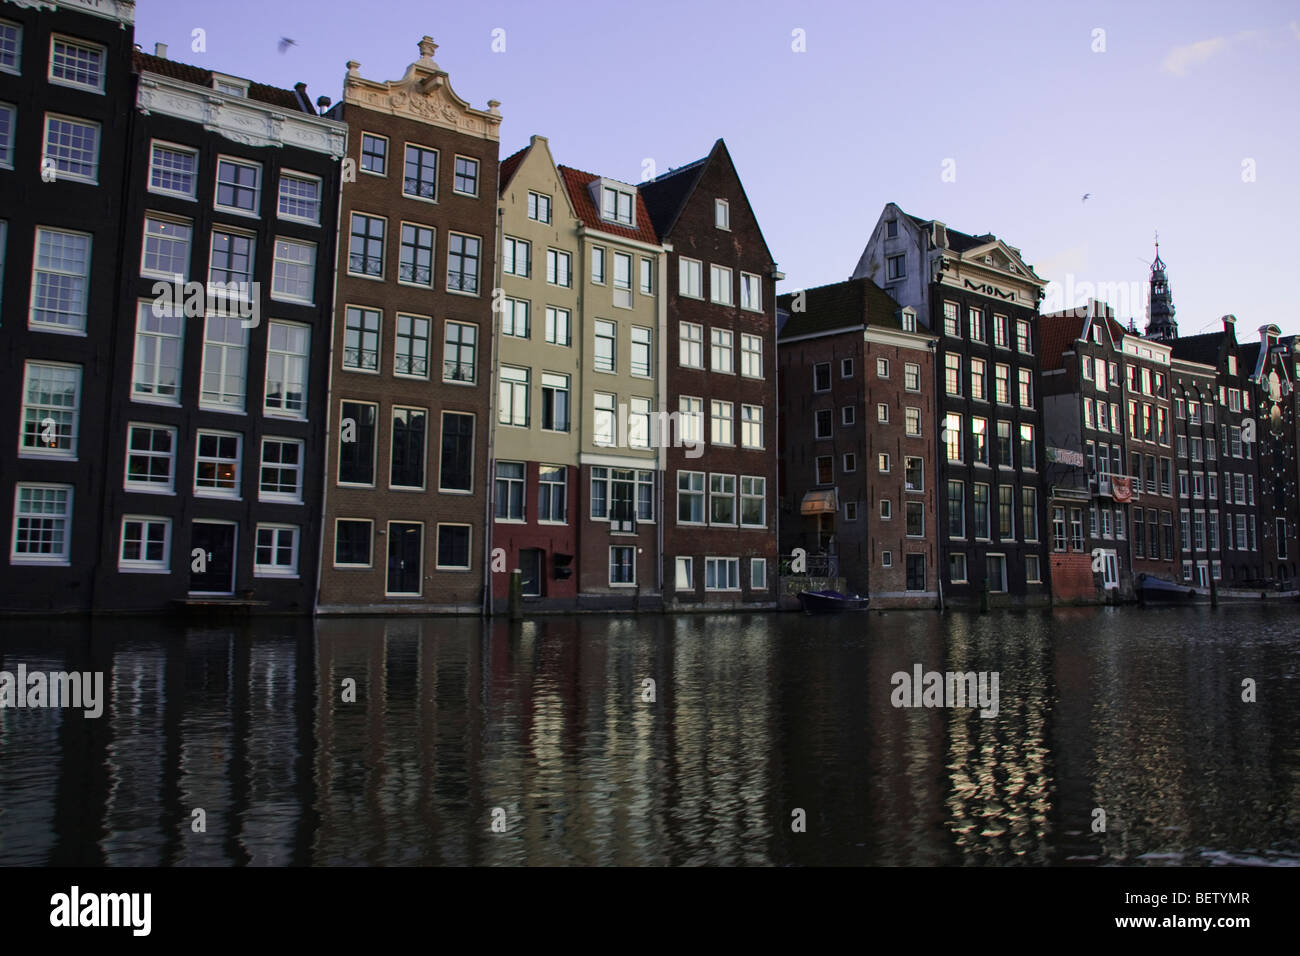 Netherlands Amsterdam Architecture canal houses Stock Photo